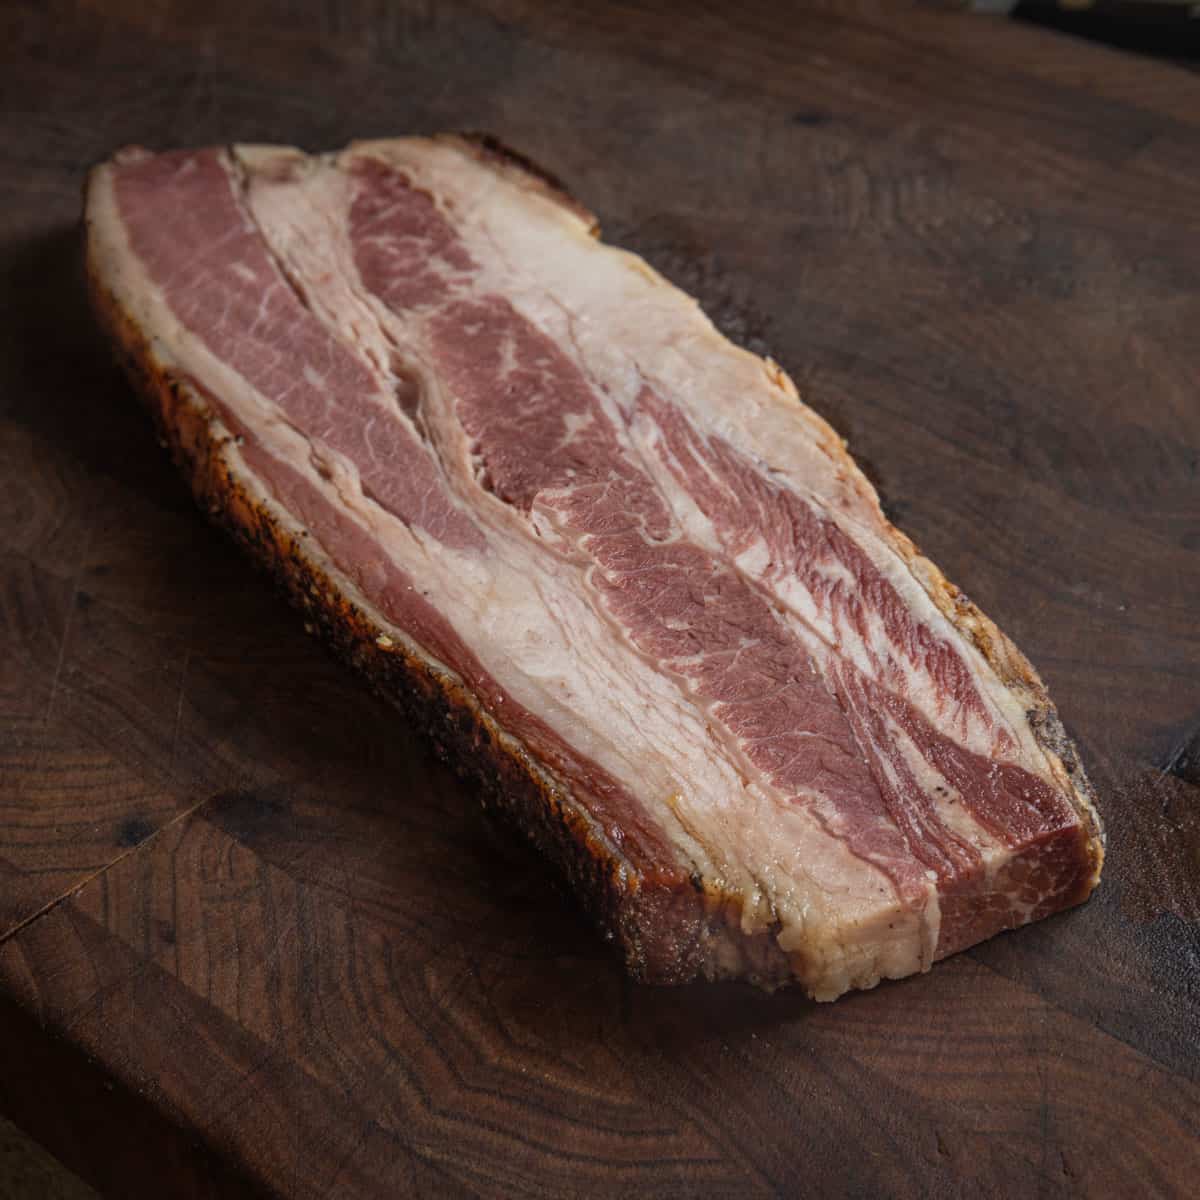 A thick slice of bacon or a bacon steak on a cutting board.